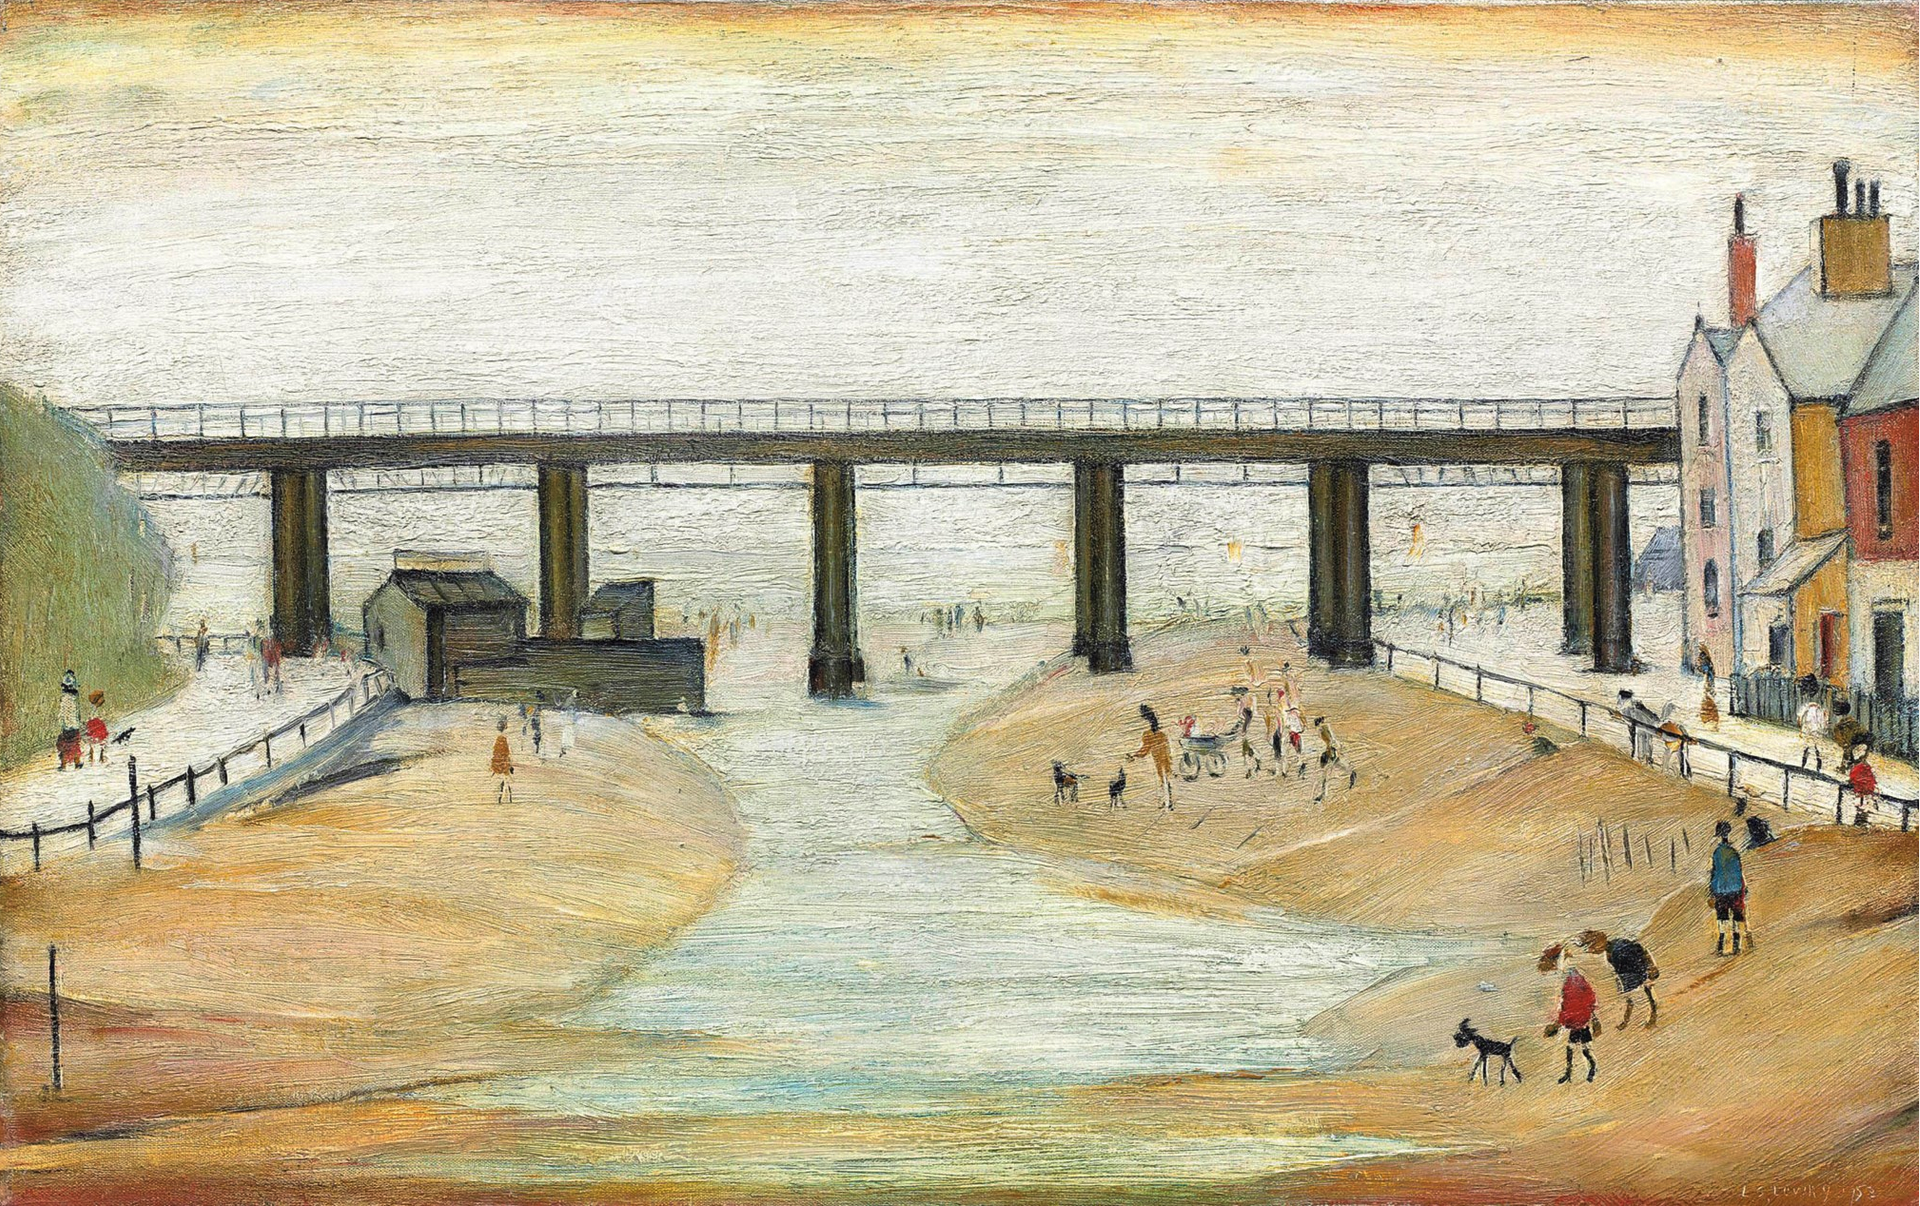 Sandsend near Whitby (1953) by Laurence Stephen Lowry (1887 - 1976), English artist.